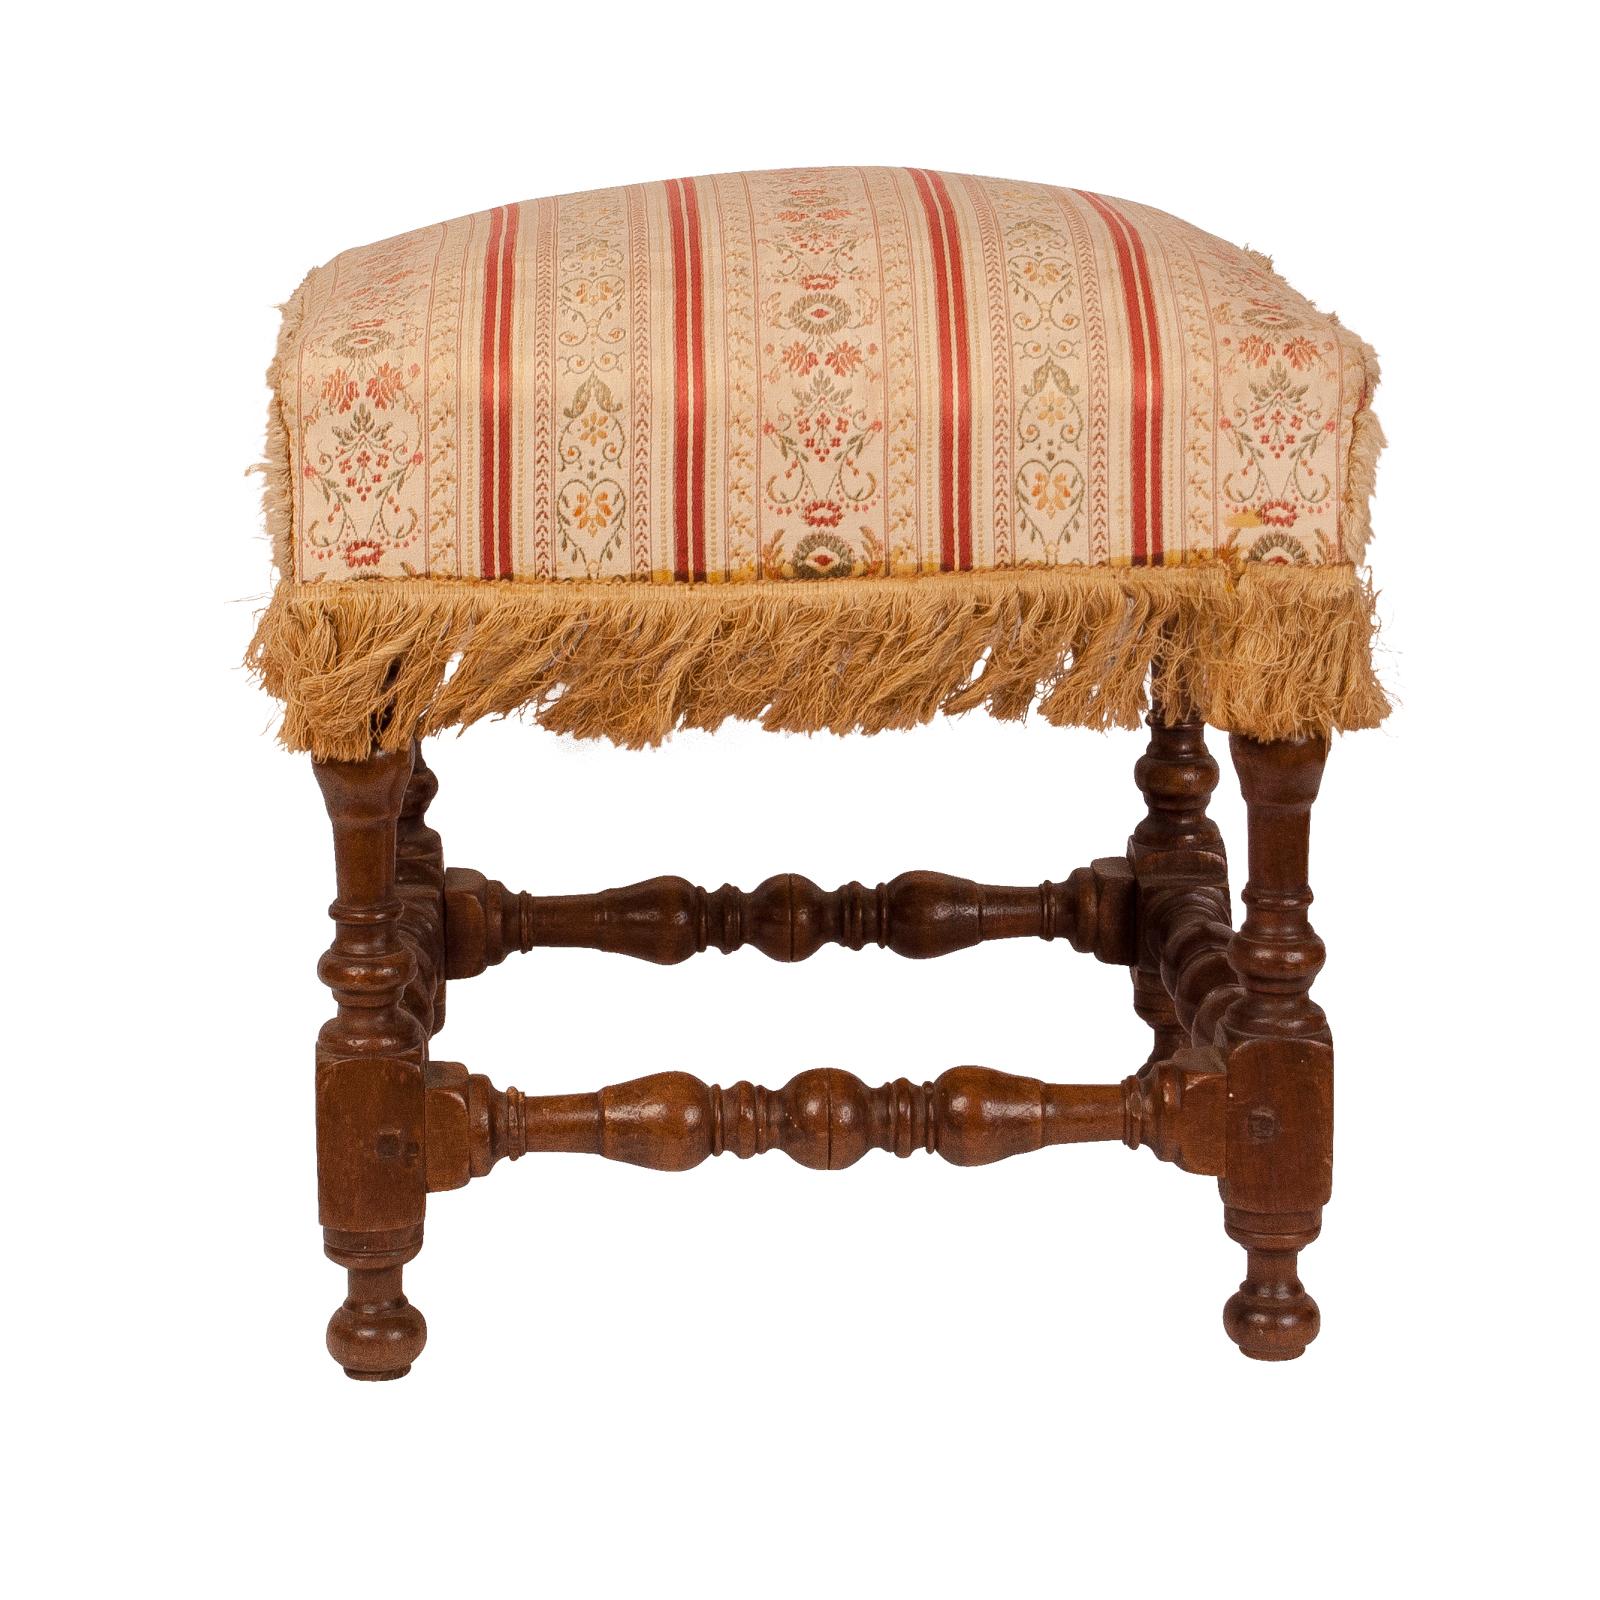 A mid-17th century walnut Baroque stool with turned legs. Spanish or Italian from a very good old collection.